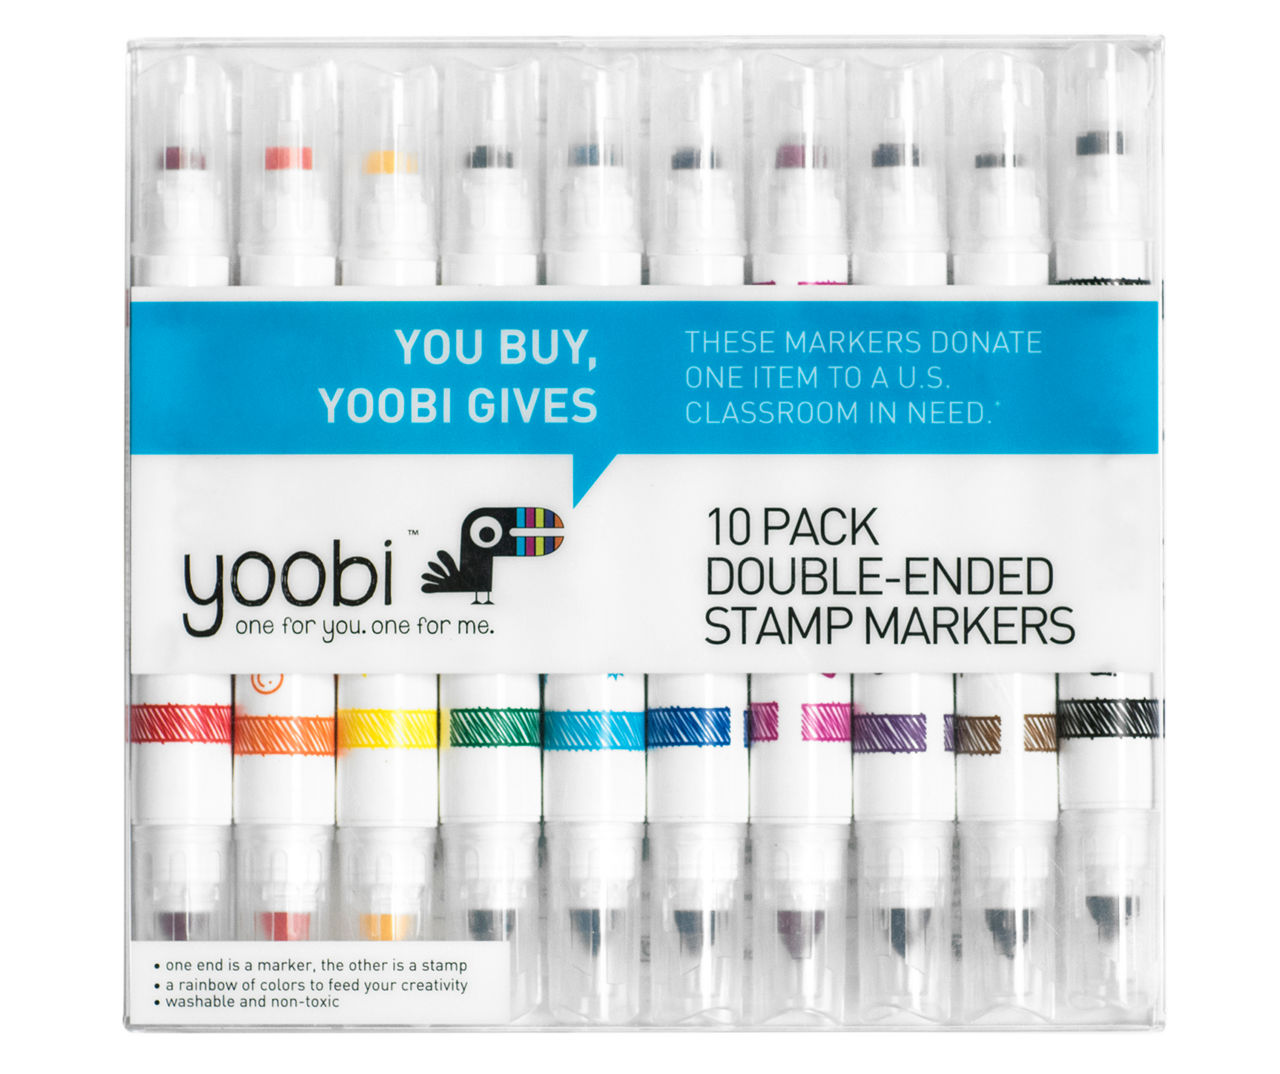 Yoobi Double Ended Markers, 8-Pack